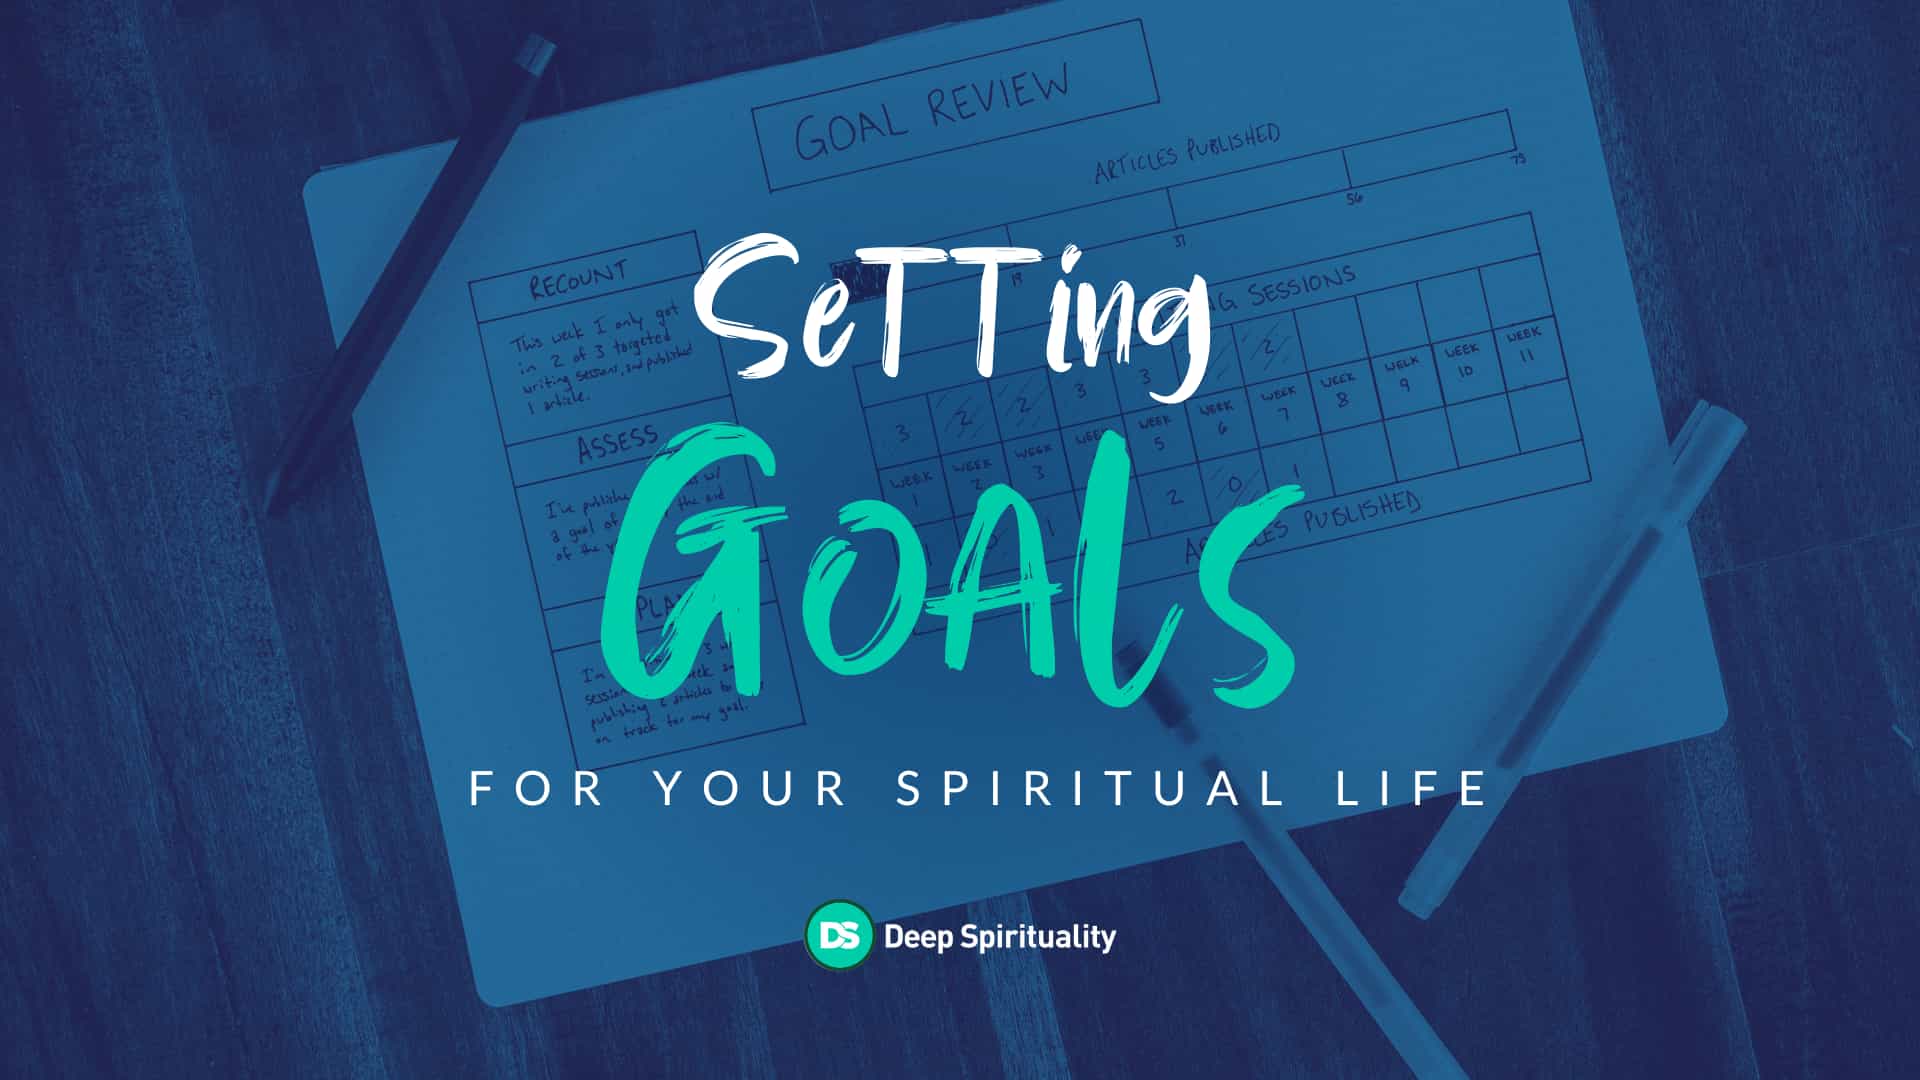 How to Set Goals for Your Spiritual Life 21